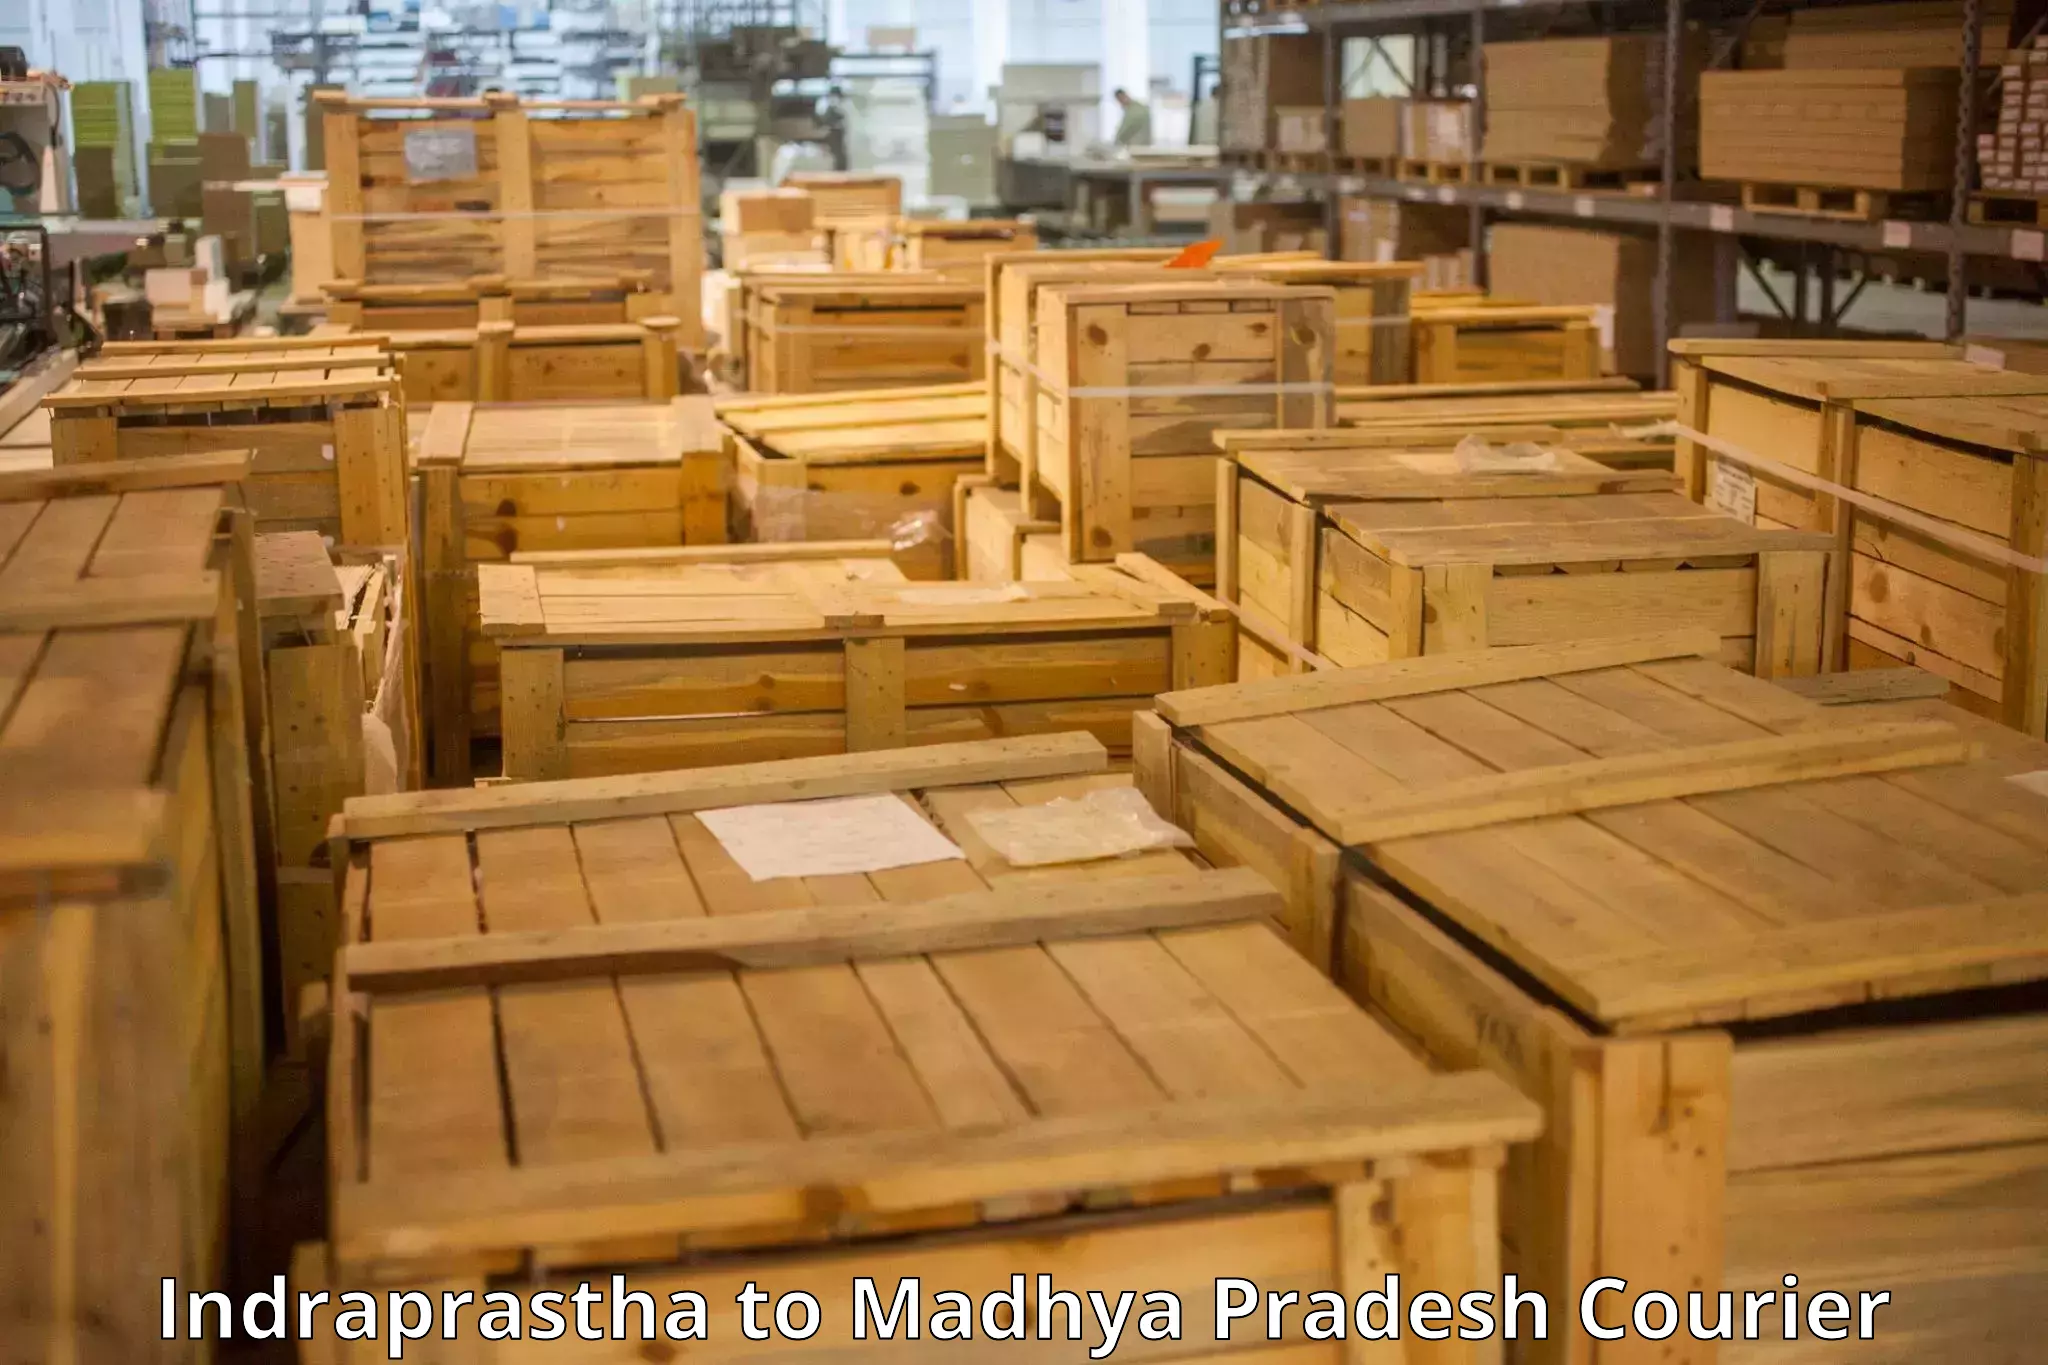 Baggage courier operations in Indraprastha to Raipur Karchuliyan